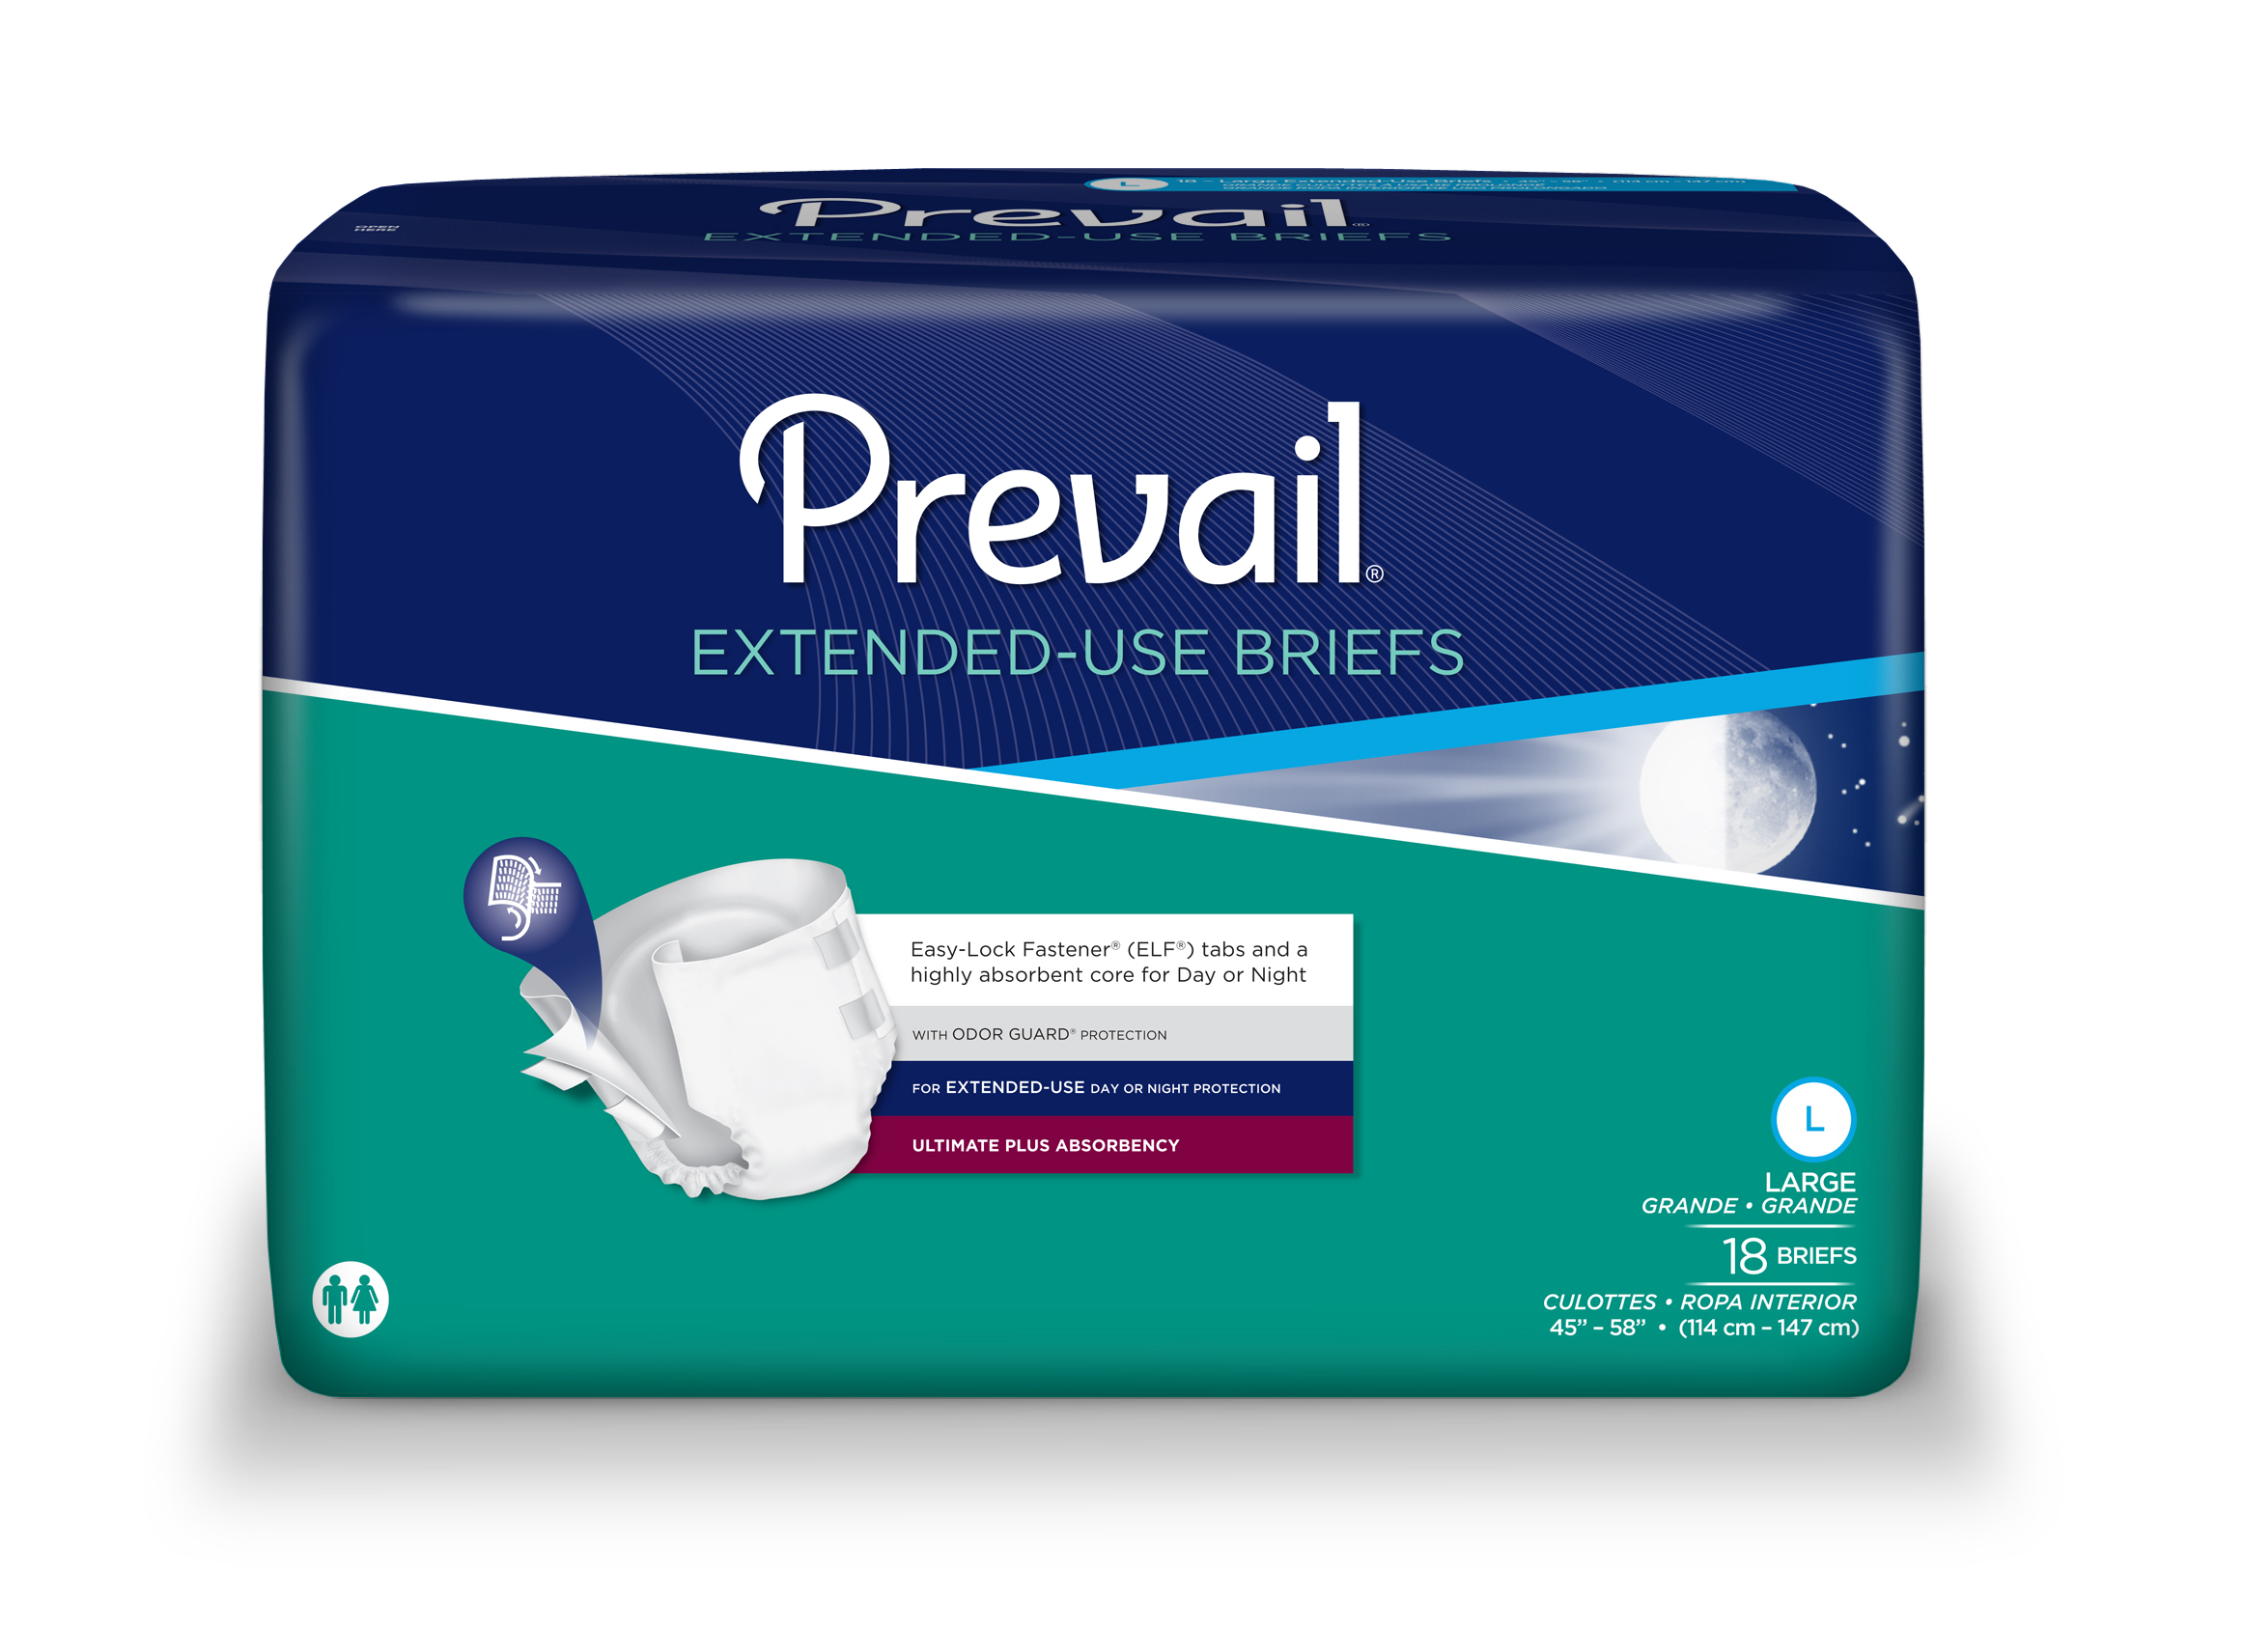 Prevail and Attends Adult Diapers